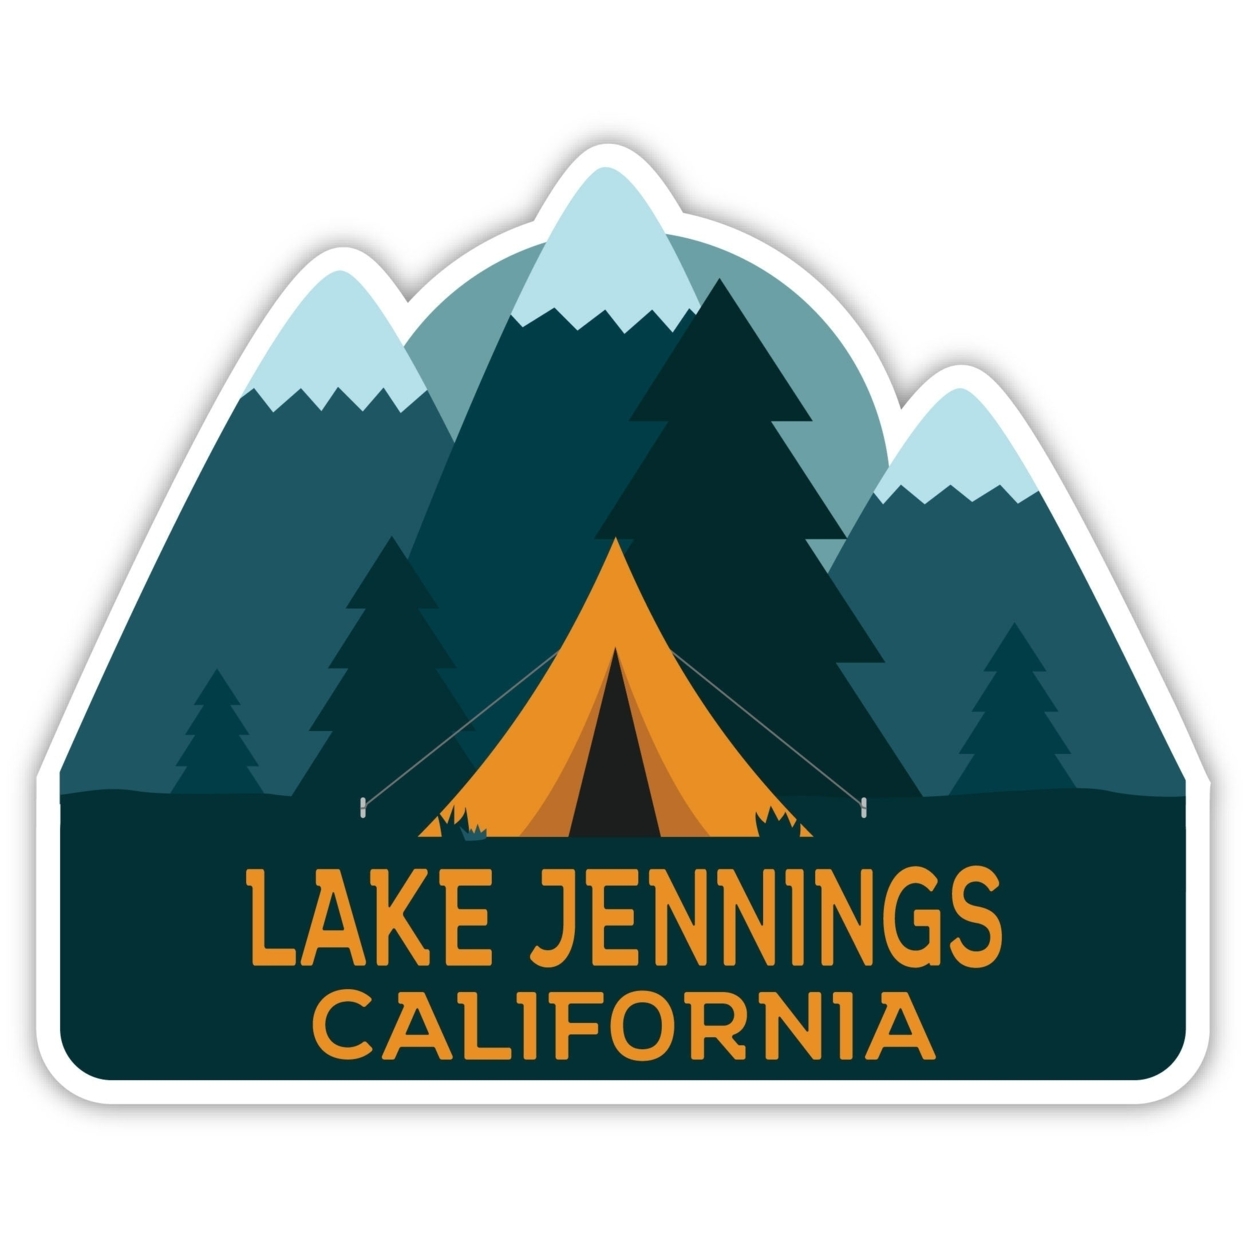 Lake Jennings California Souvenir Decorative Stickers (Choose Theme And Size) - 2-Inch, Camp Life